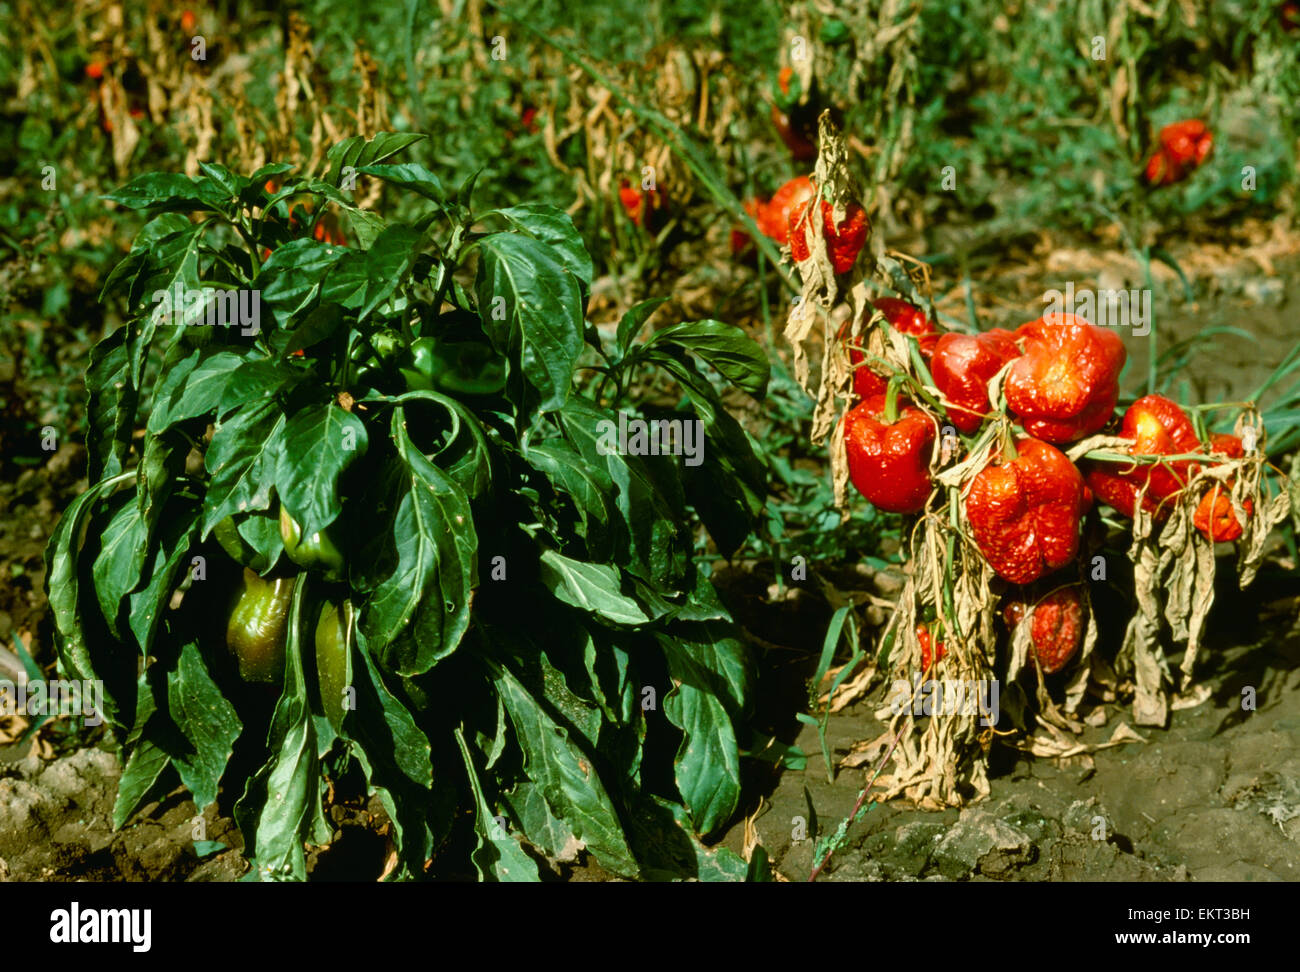 Agriculture - Crop disease, bell peppers, Phytophthora Wilt (Phytophthora species, P. capsici), wilt disease / Colorado, USA. Stock Photo